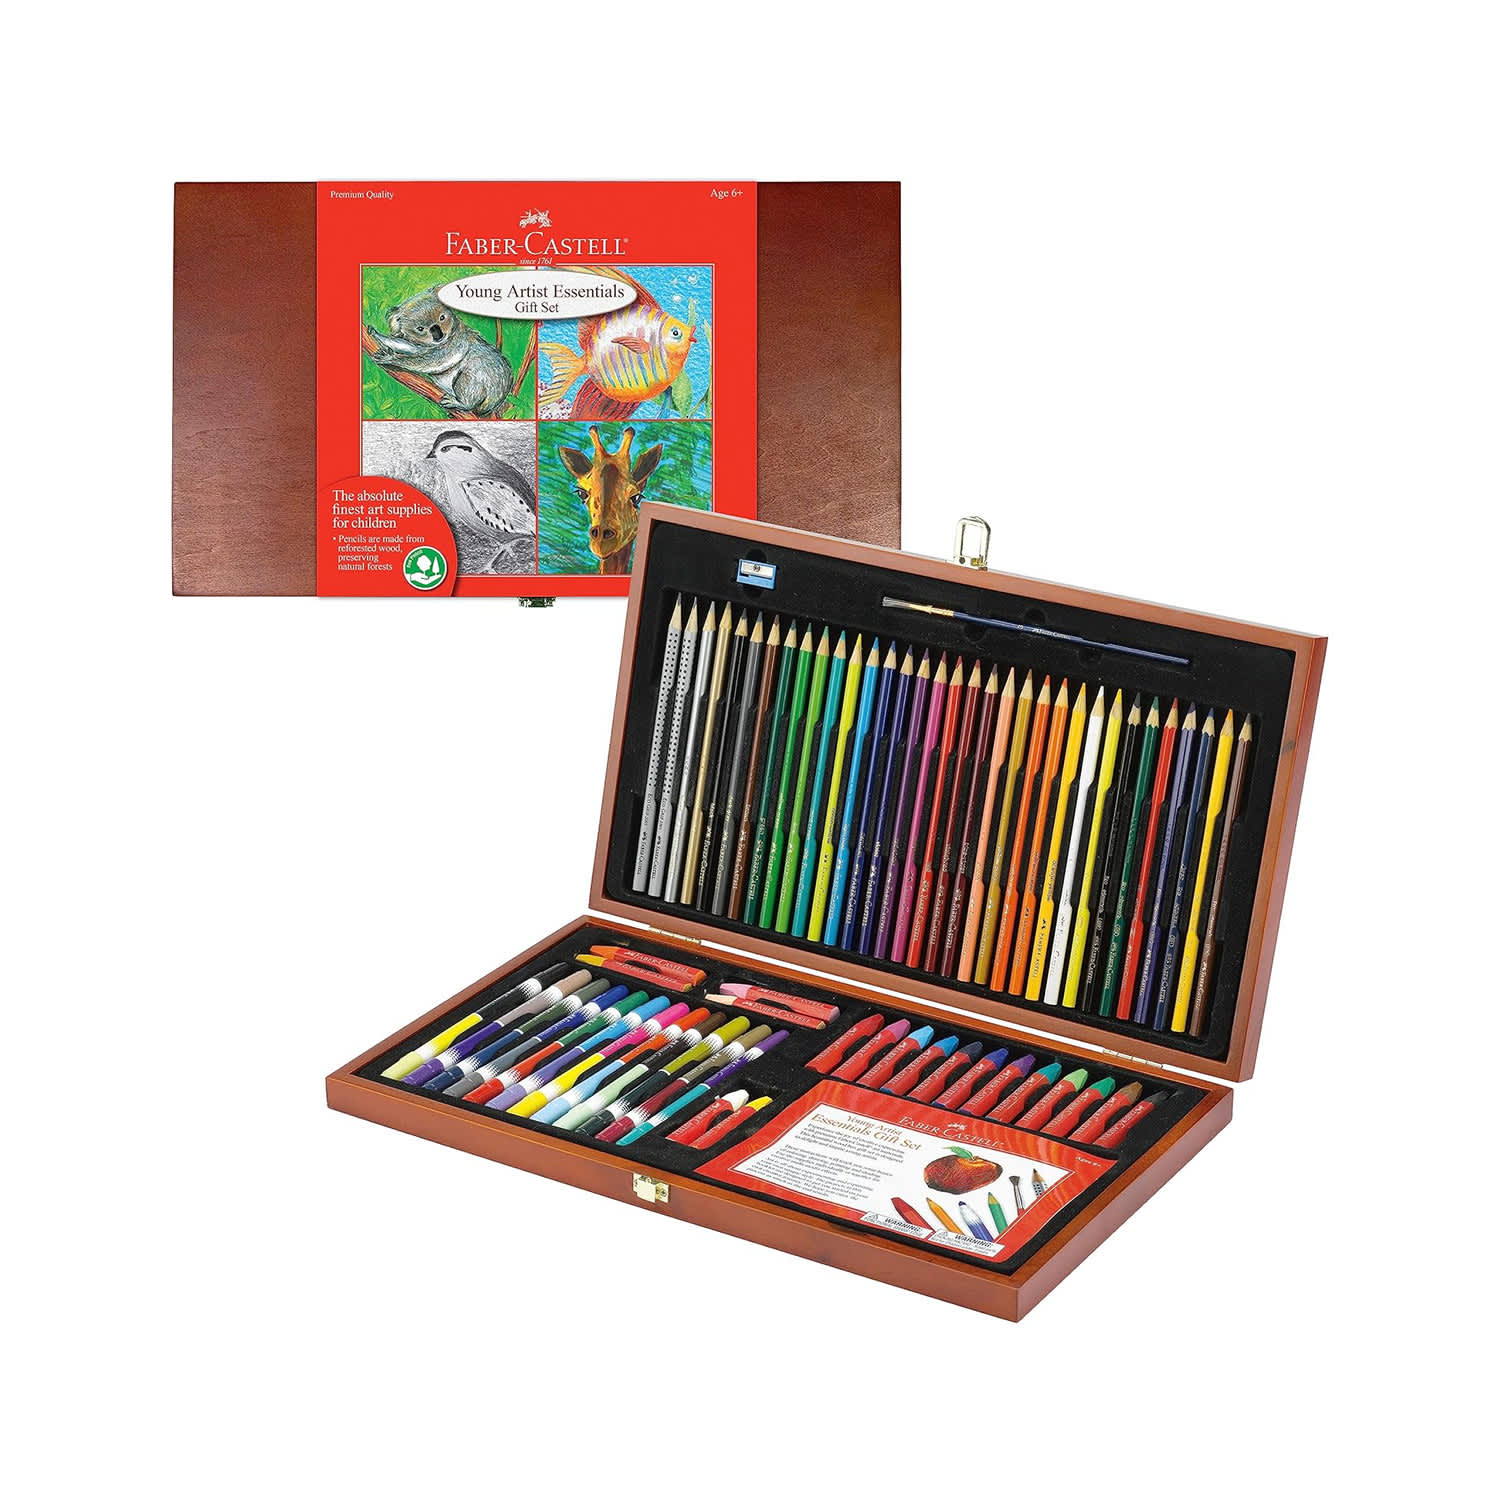 http://cdn.apartmenttherapy.info/image/upload/v1699310646/cb/shopping/2023-11/best-art-supplies-for-young-artists/faber-castell-young-artist-essentials.jpg